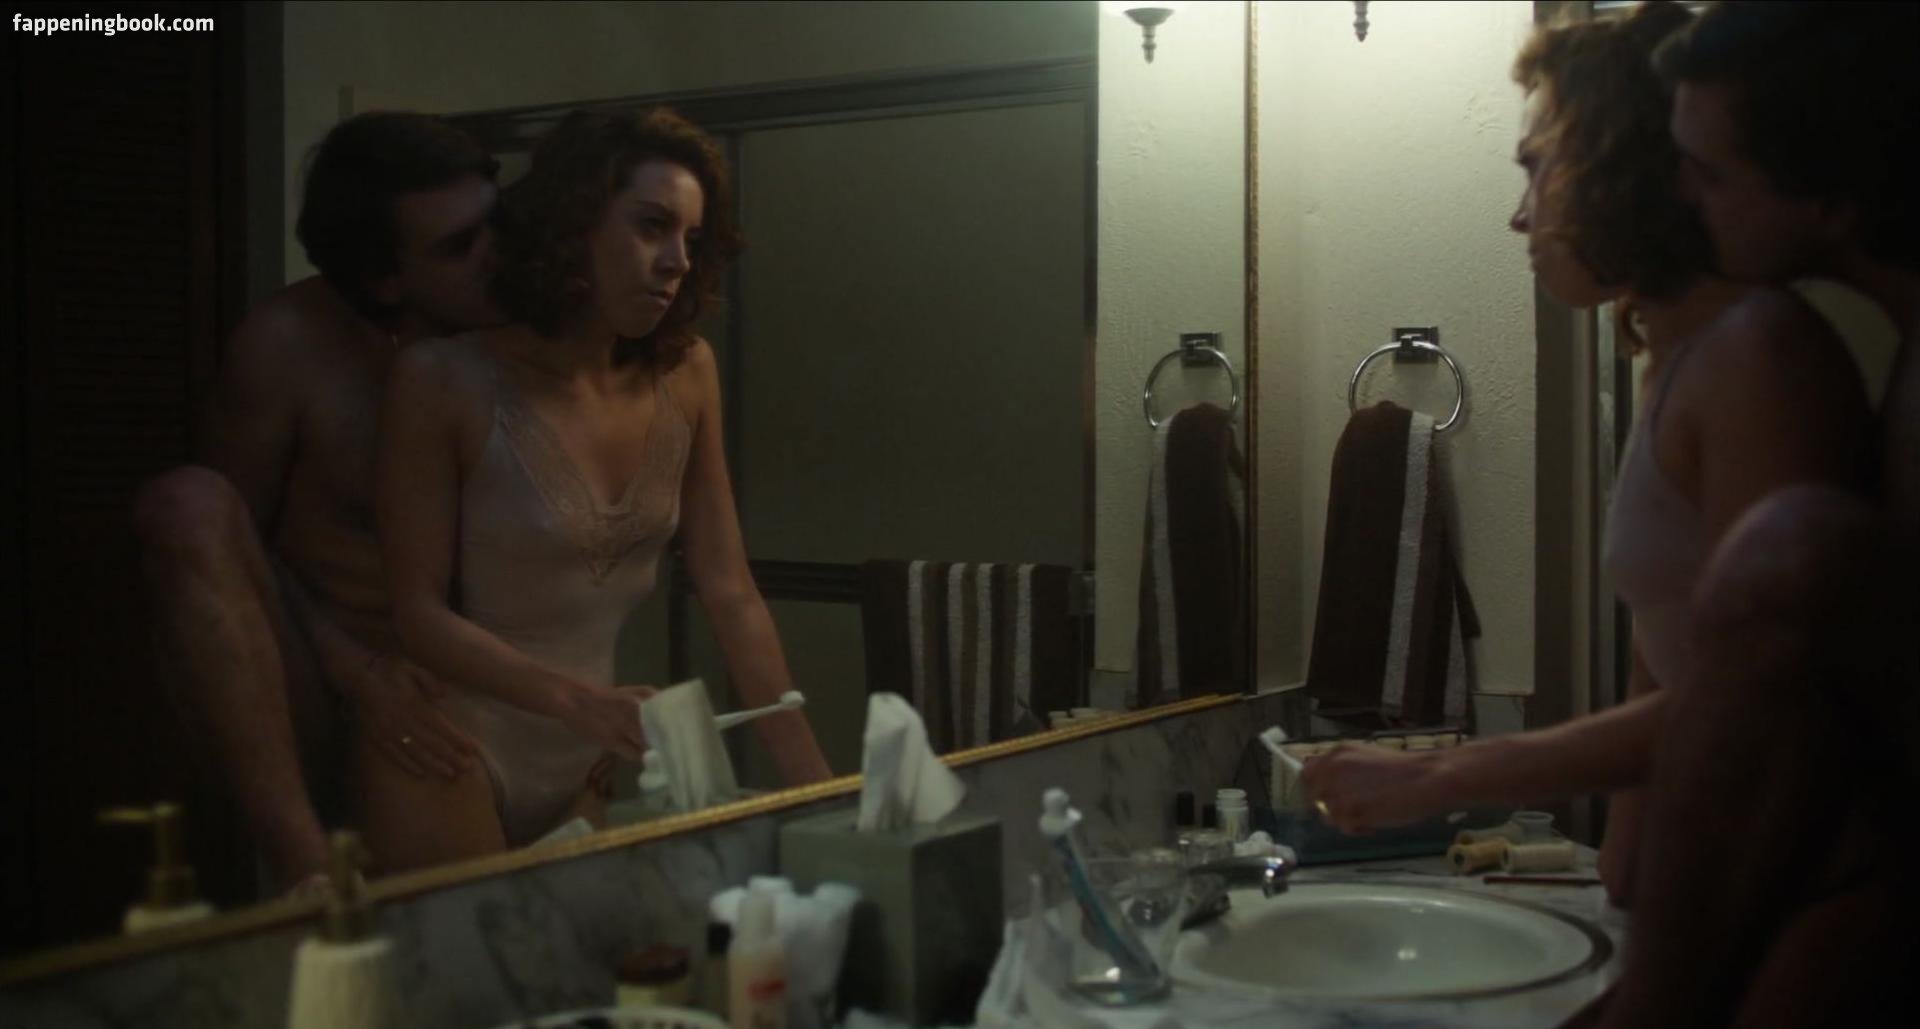 Aubrey Plaza Nude, The Fappening - Photo #58528 - FappeningBook.